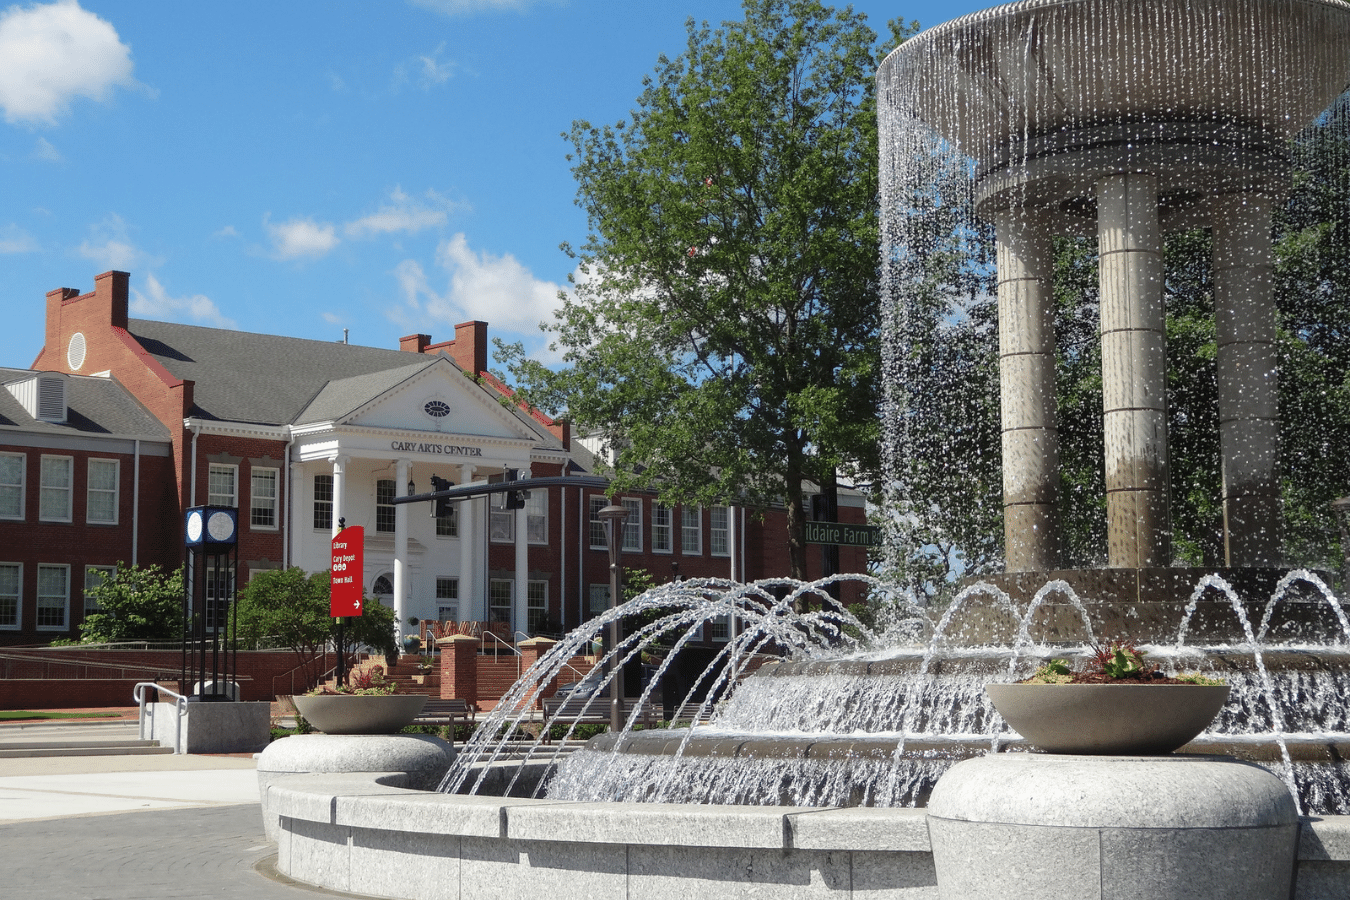 Downtown Cary, North Carolina - A photo of the Arts Center located in Downtown Cary